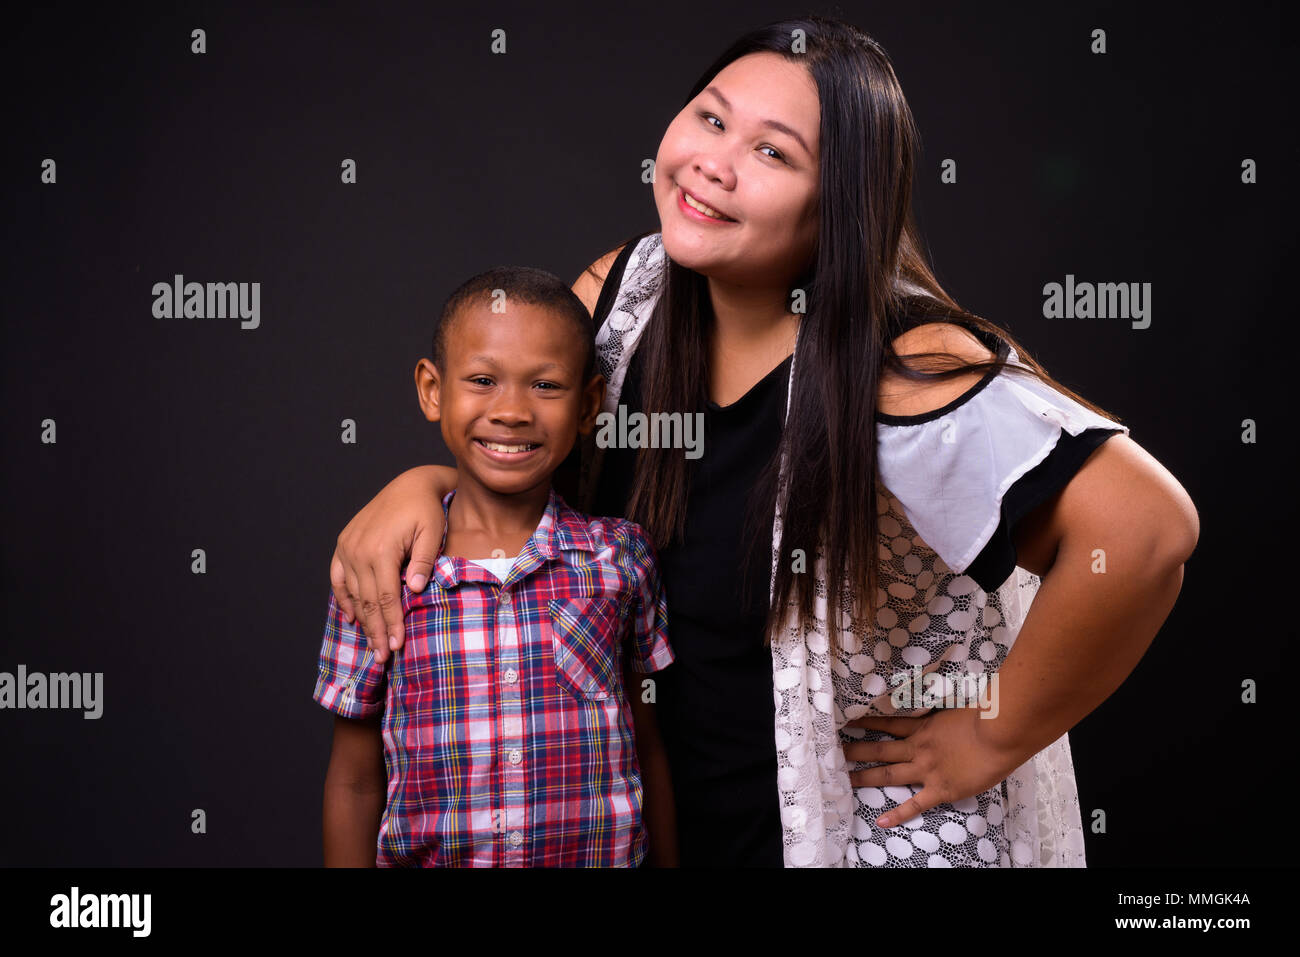 Studio shot of mother and son together against black background Stock Photo